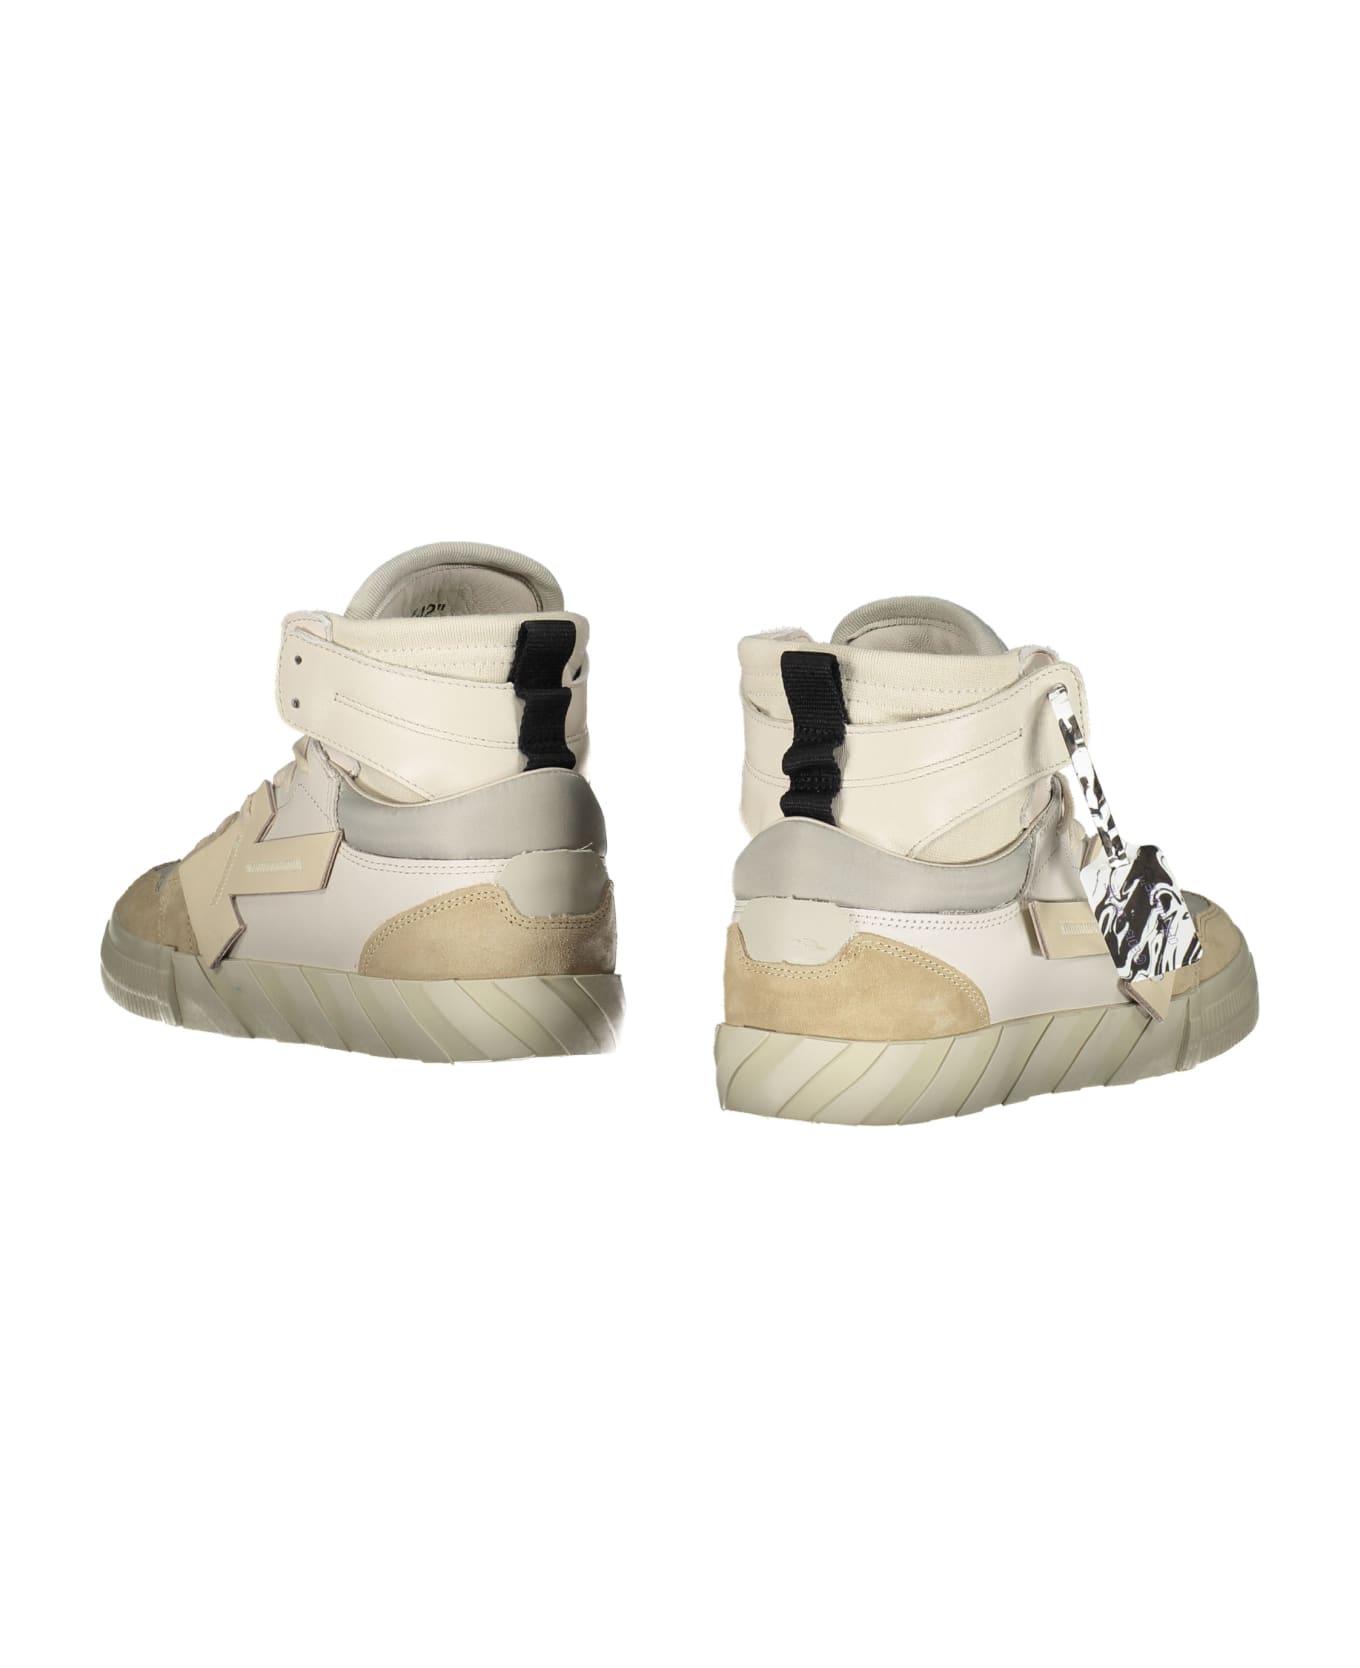 Off-White High-top Sneakers - Beige スニーカー